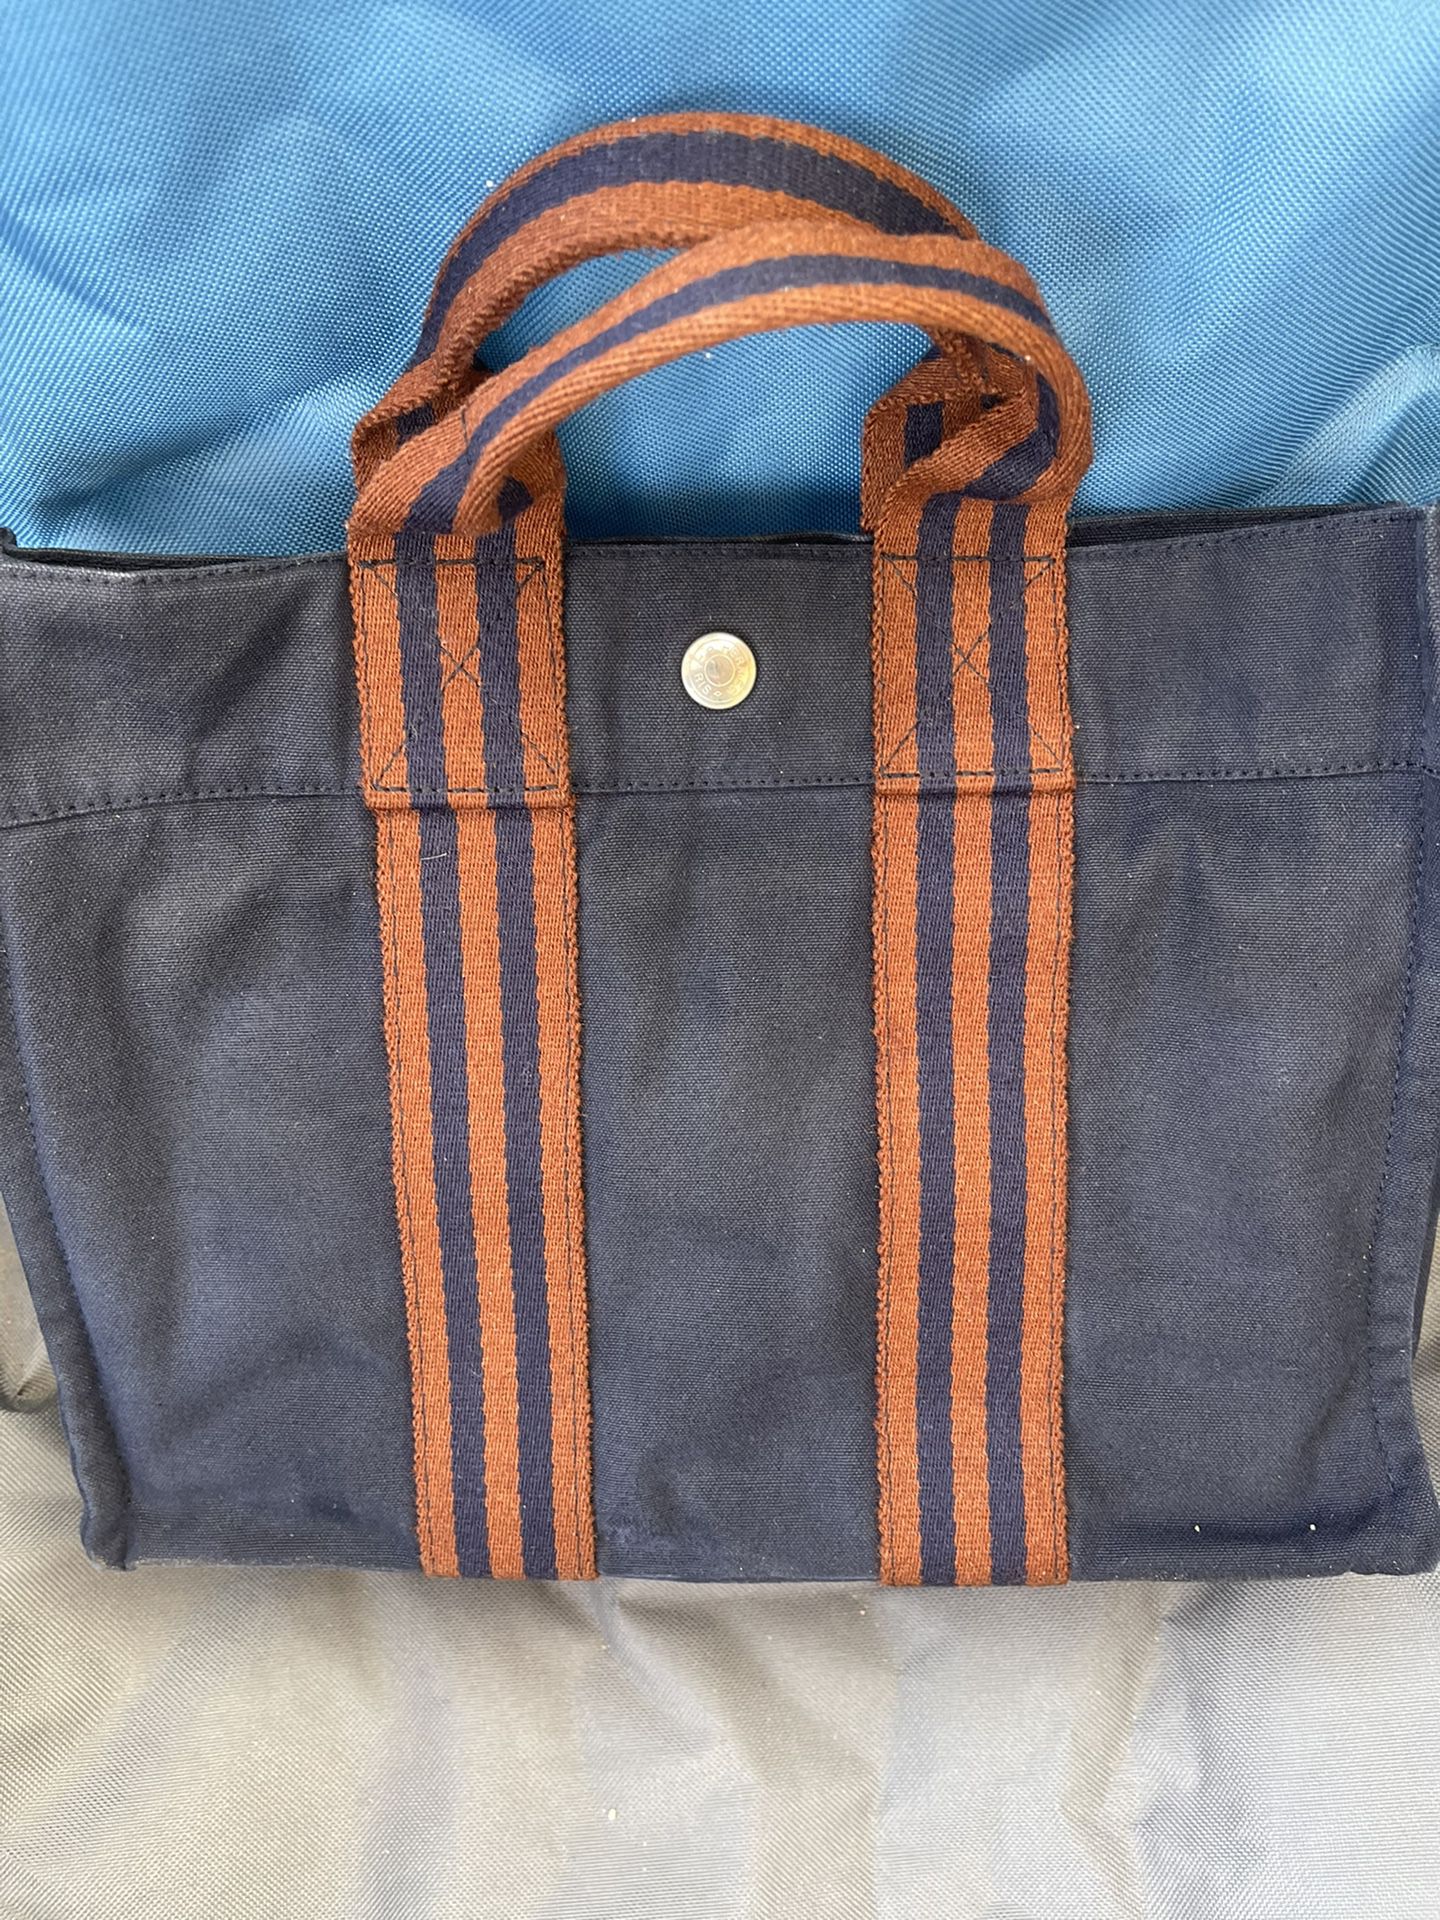 HERMES Fourre Tout PM Tote Bag for Sale in West Covina, CA - OfferUp